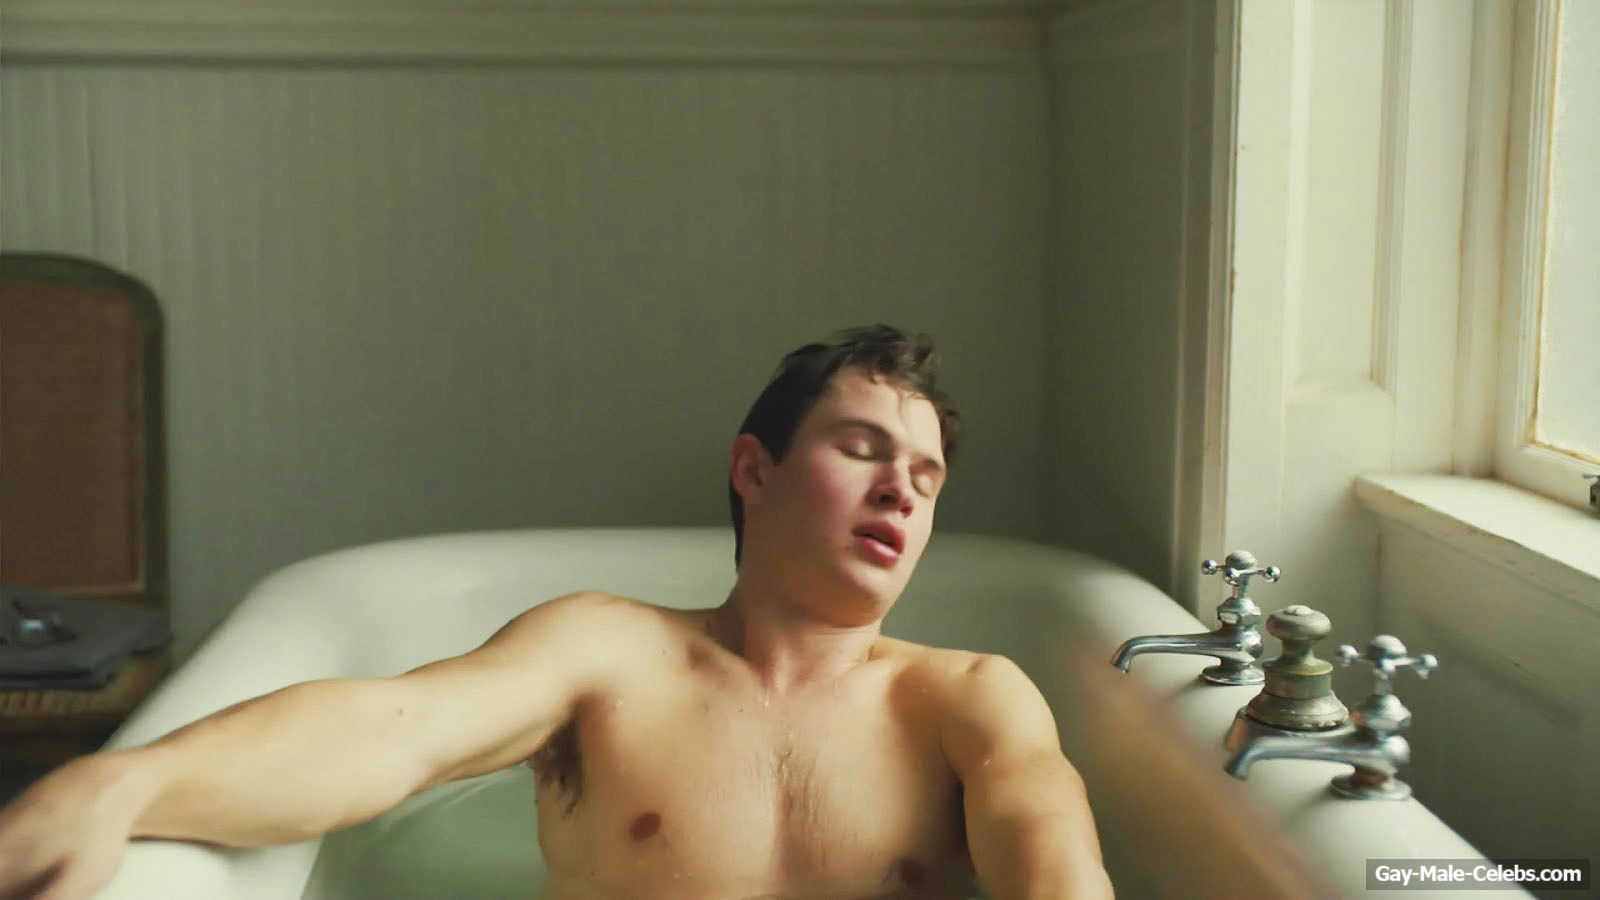 Ansel Elgort Wet Nude Body Scenes from The Goldfinch